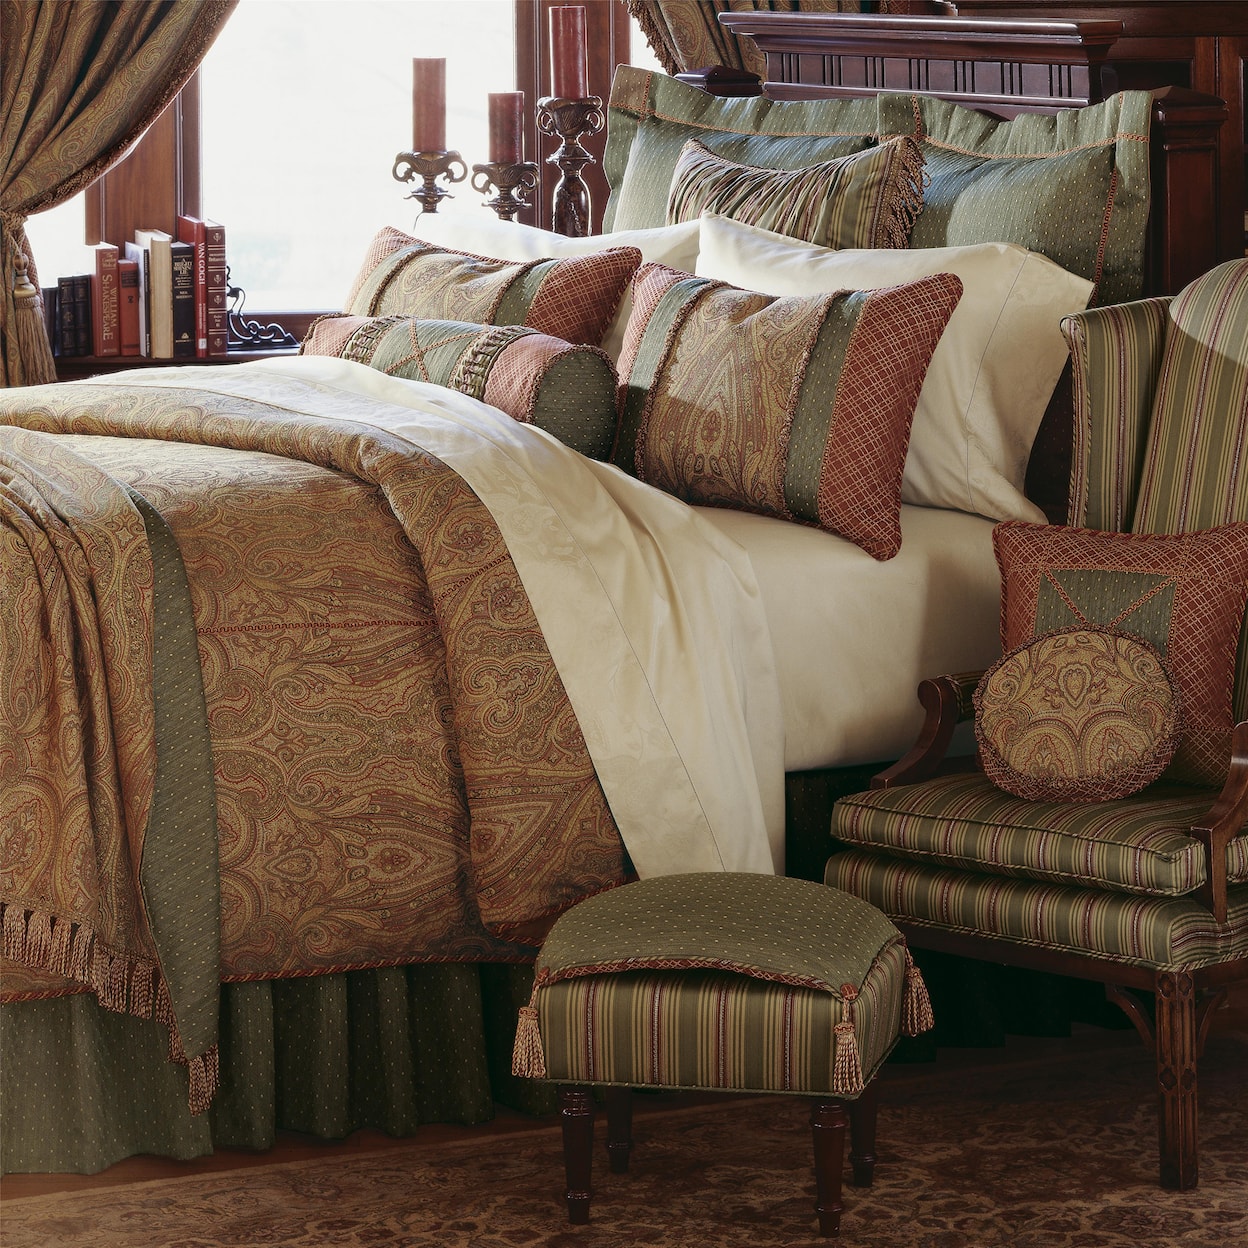 Eastern Accents Glenwood Cal King Button-Tufted Comforter